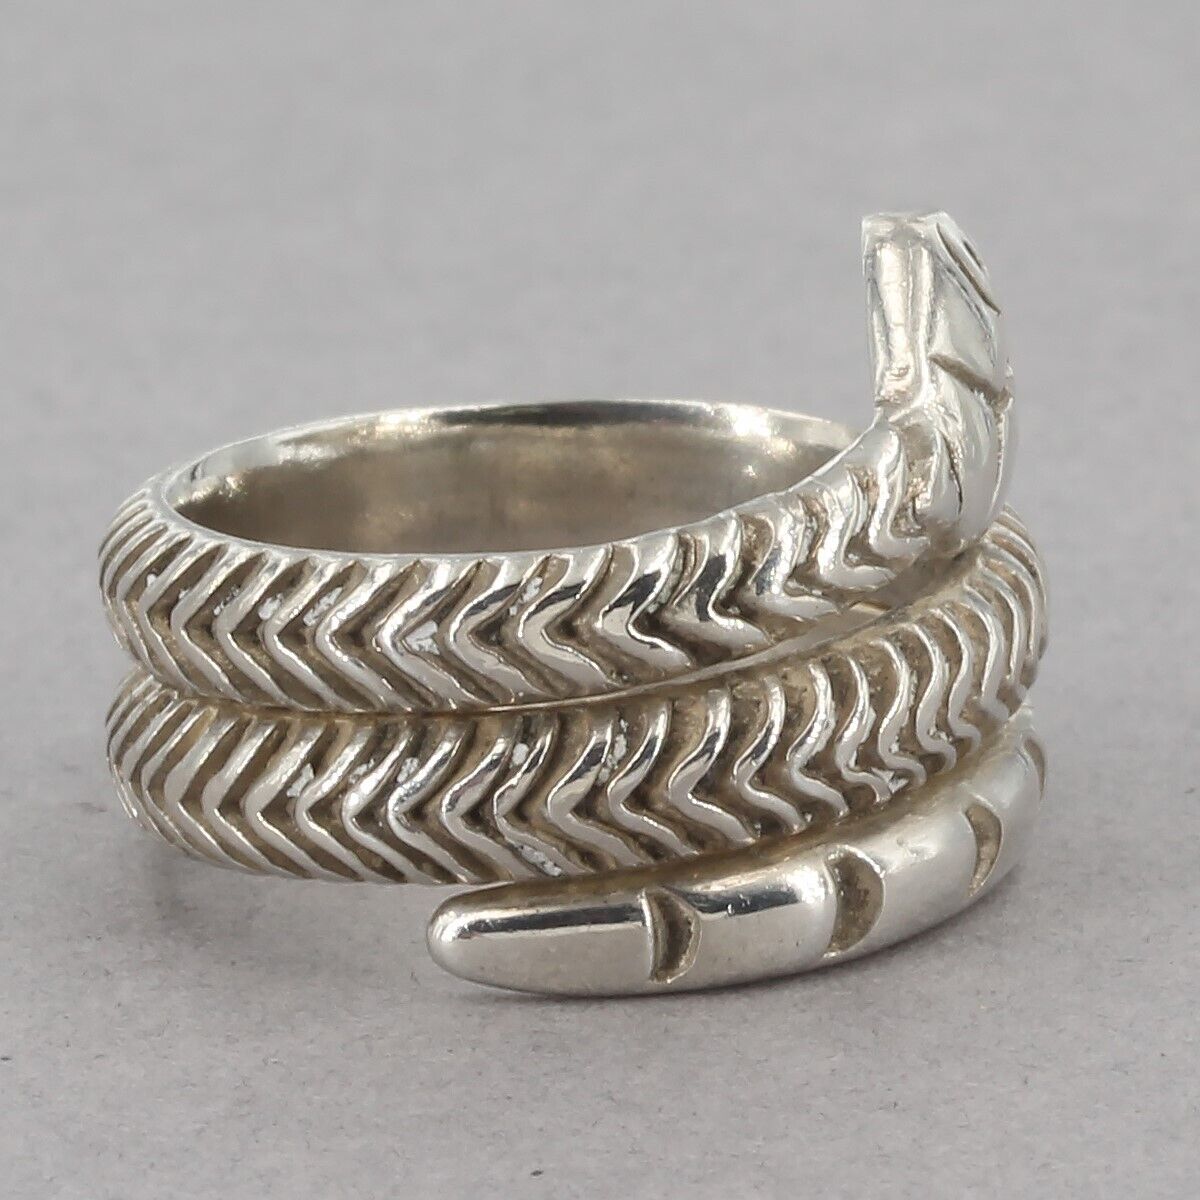 Vintage Signed Balderas Taxco Mexican Sterling Coiled Snake Wrap Ring Size 5.5